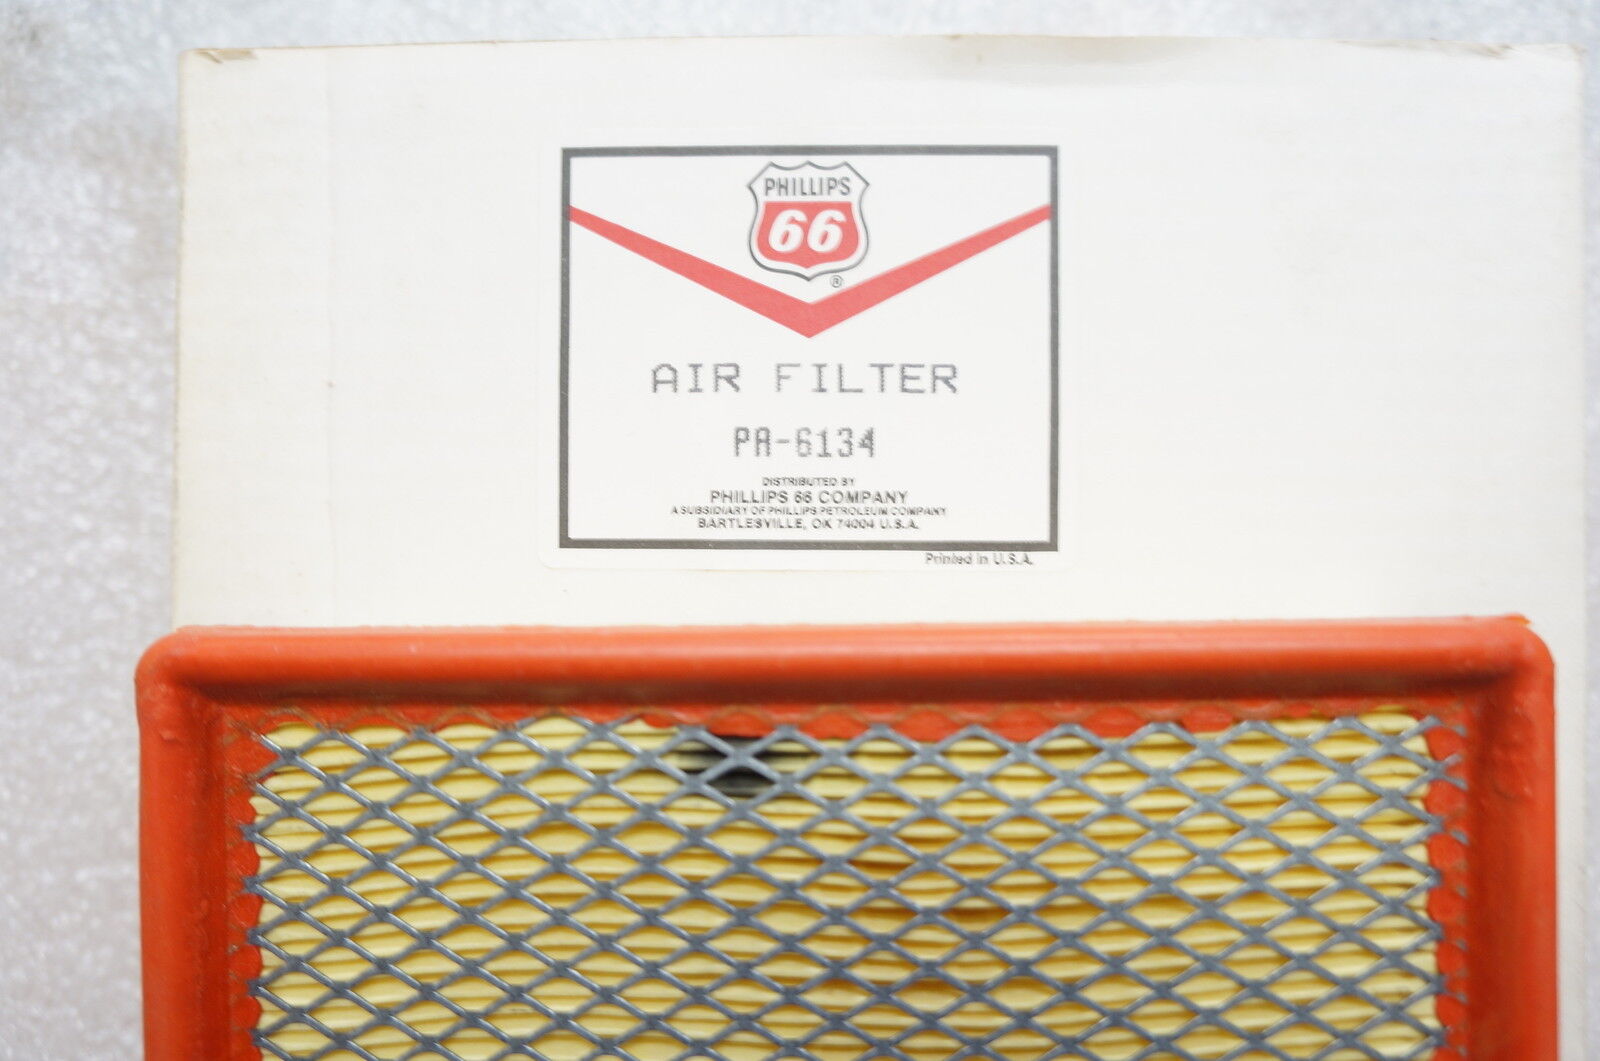 PHILLIPS 66 PA-6134 AIR FILTER NOS NEW